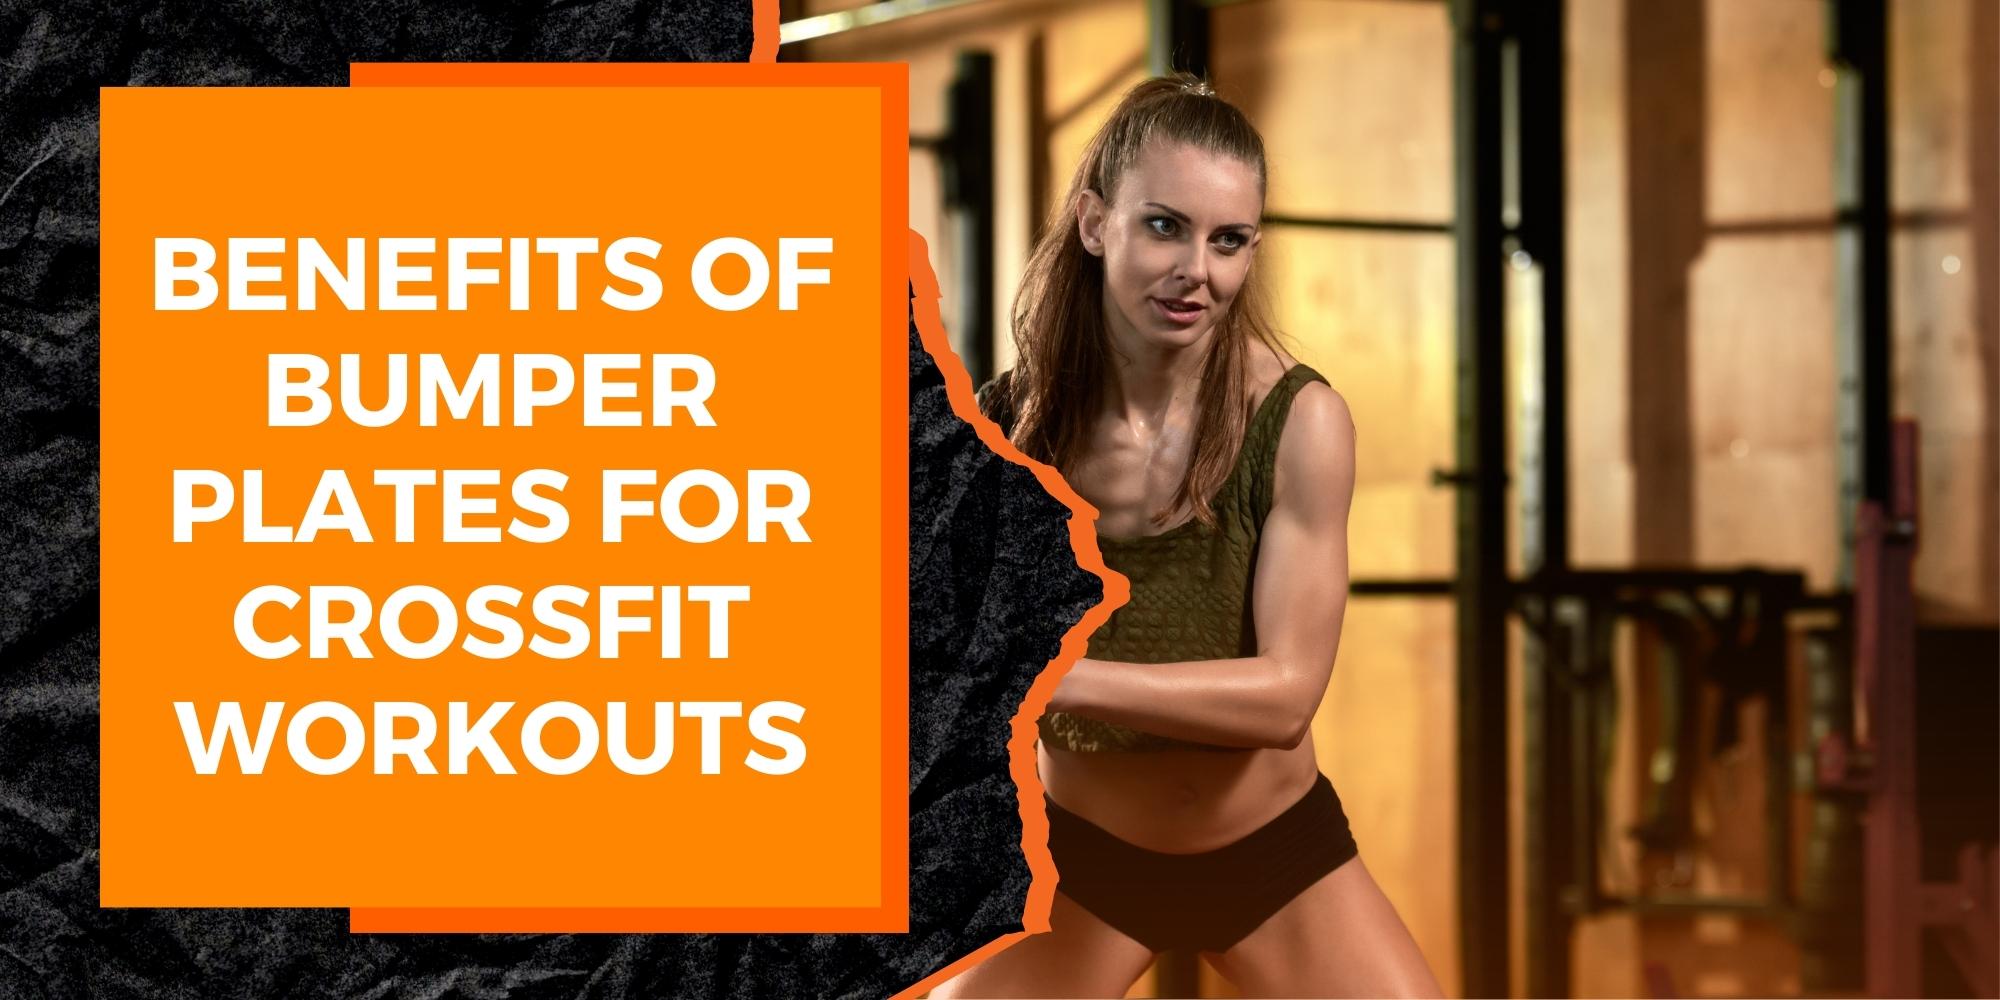 The Benefits of Bumper Plates for CrossFit Workouts